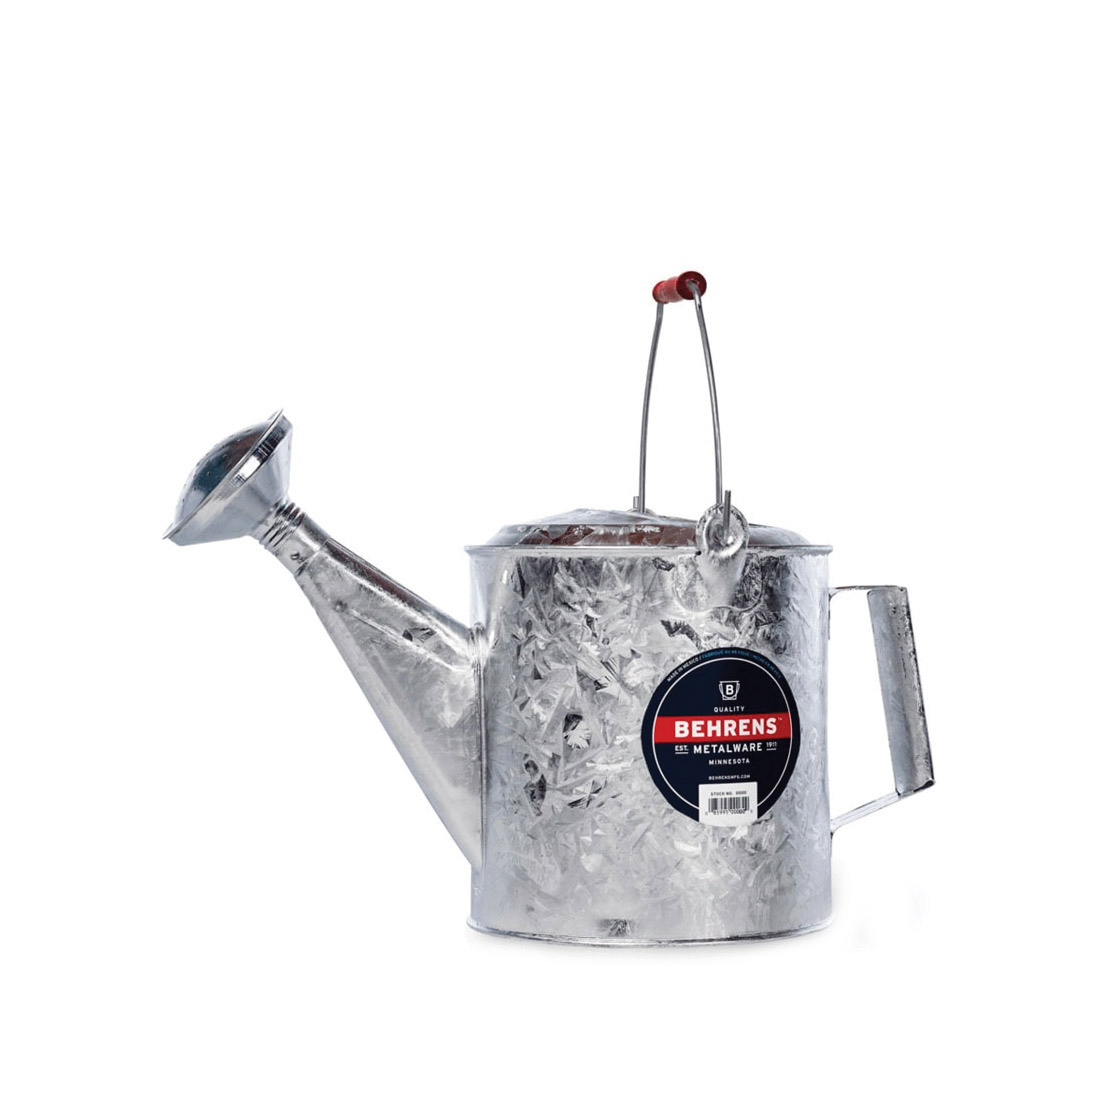 Metalware Classics 206RH Watering Can, 1.5 gal Can, Steel, Steel Sage, Hot-Dipped Galvanized